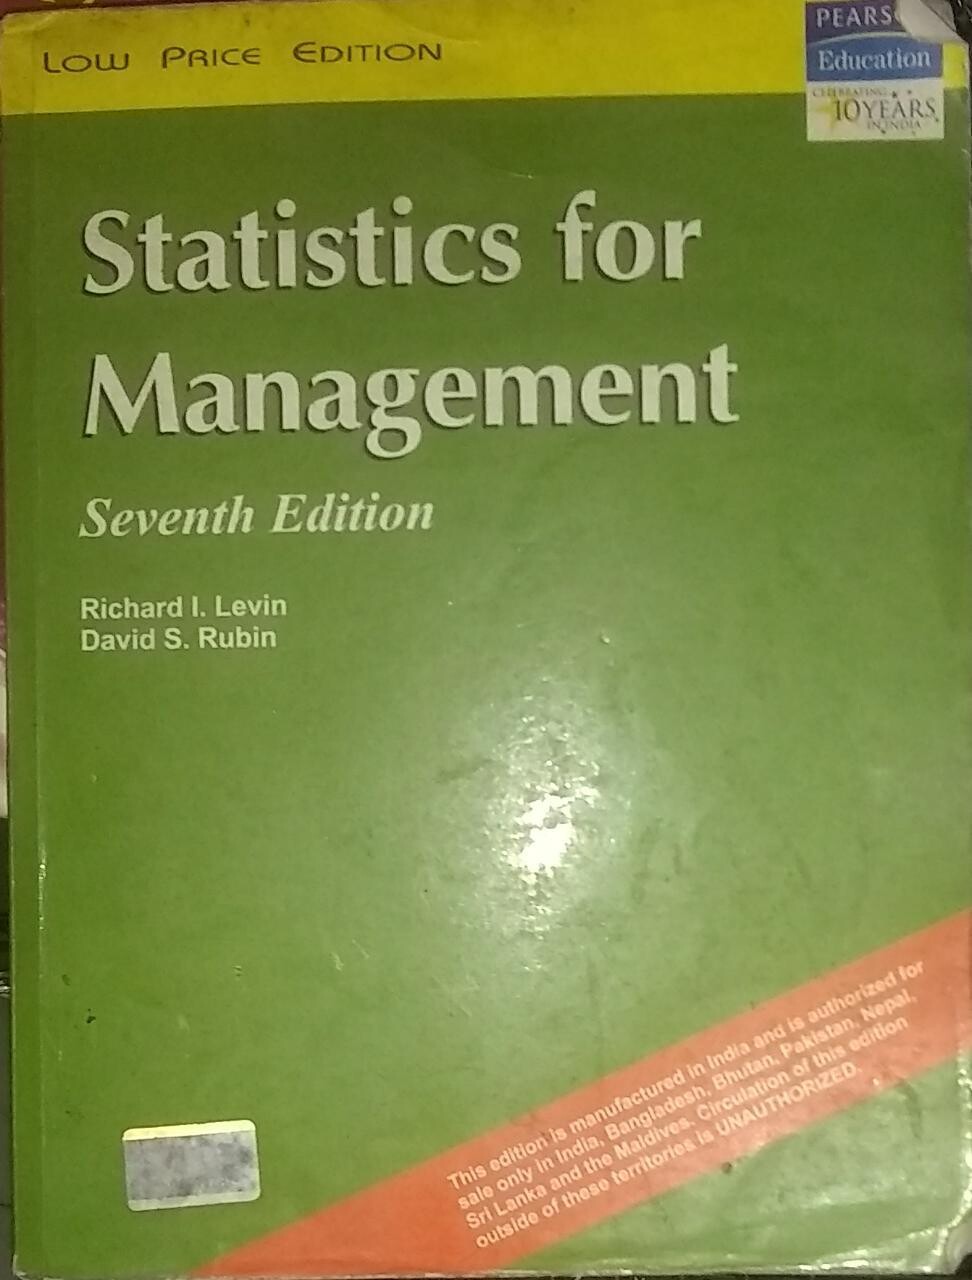 Statistics for Management (Old Edition) by Richard Levin and David Rubin